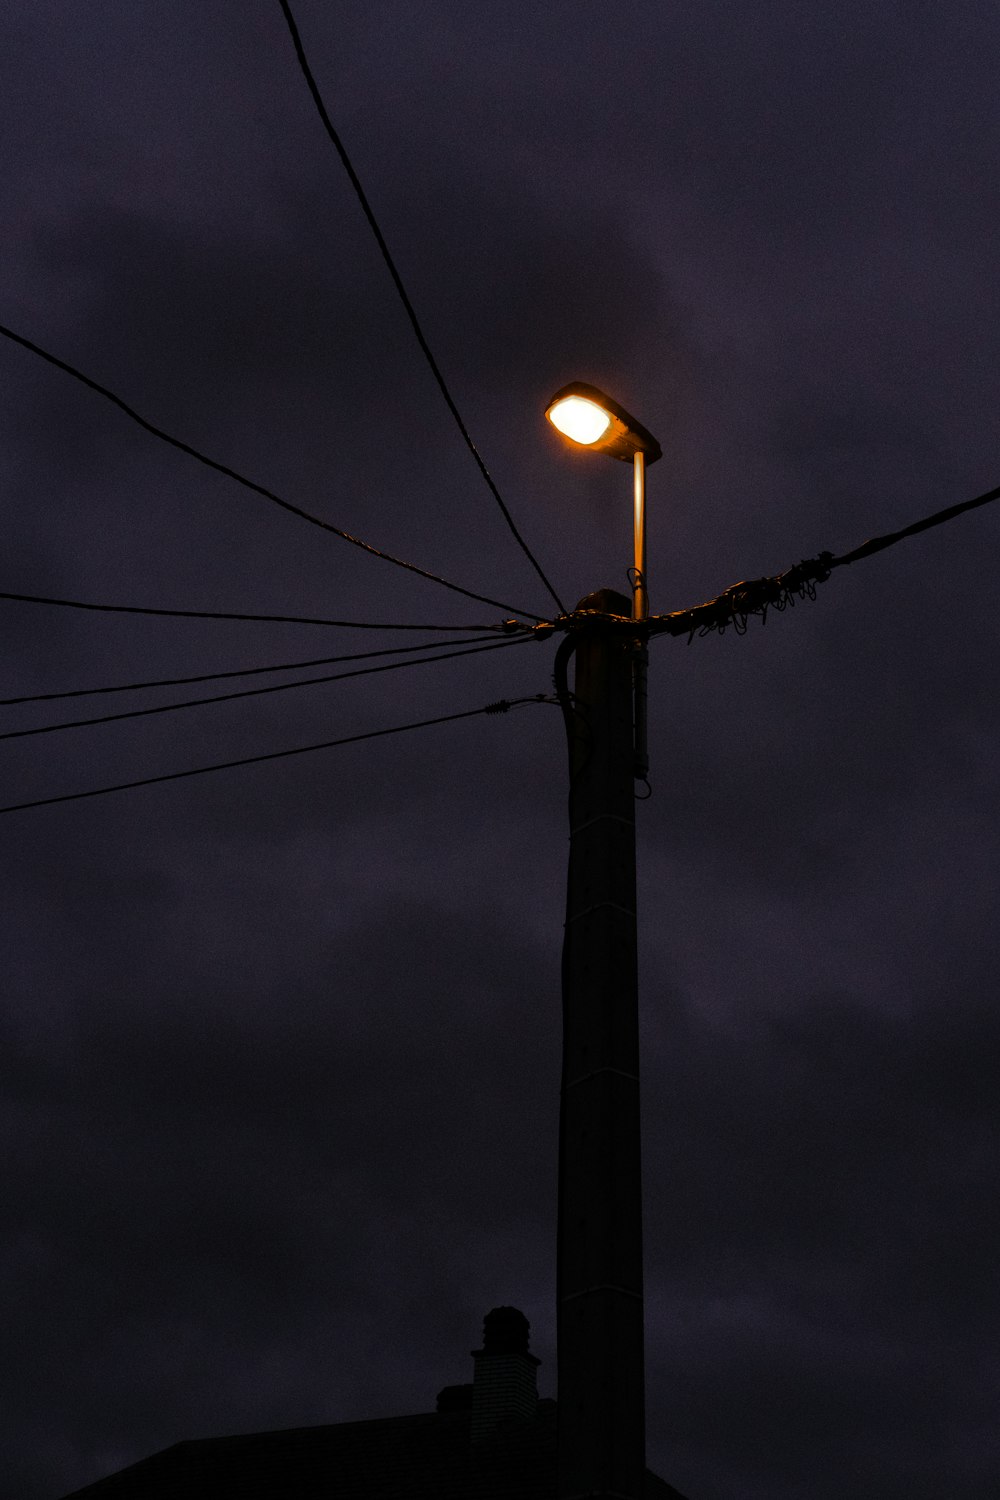 a street light on a pole with a cloudy sky in the background